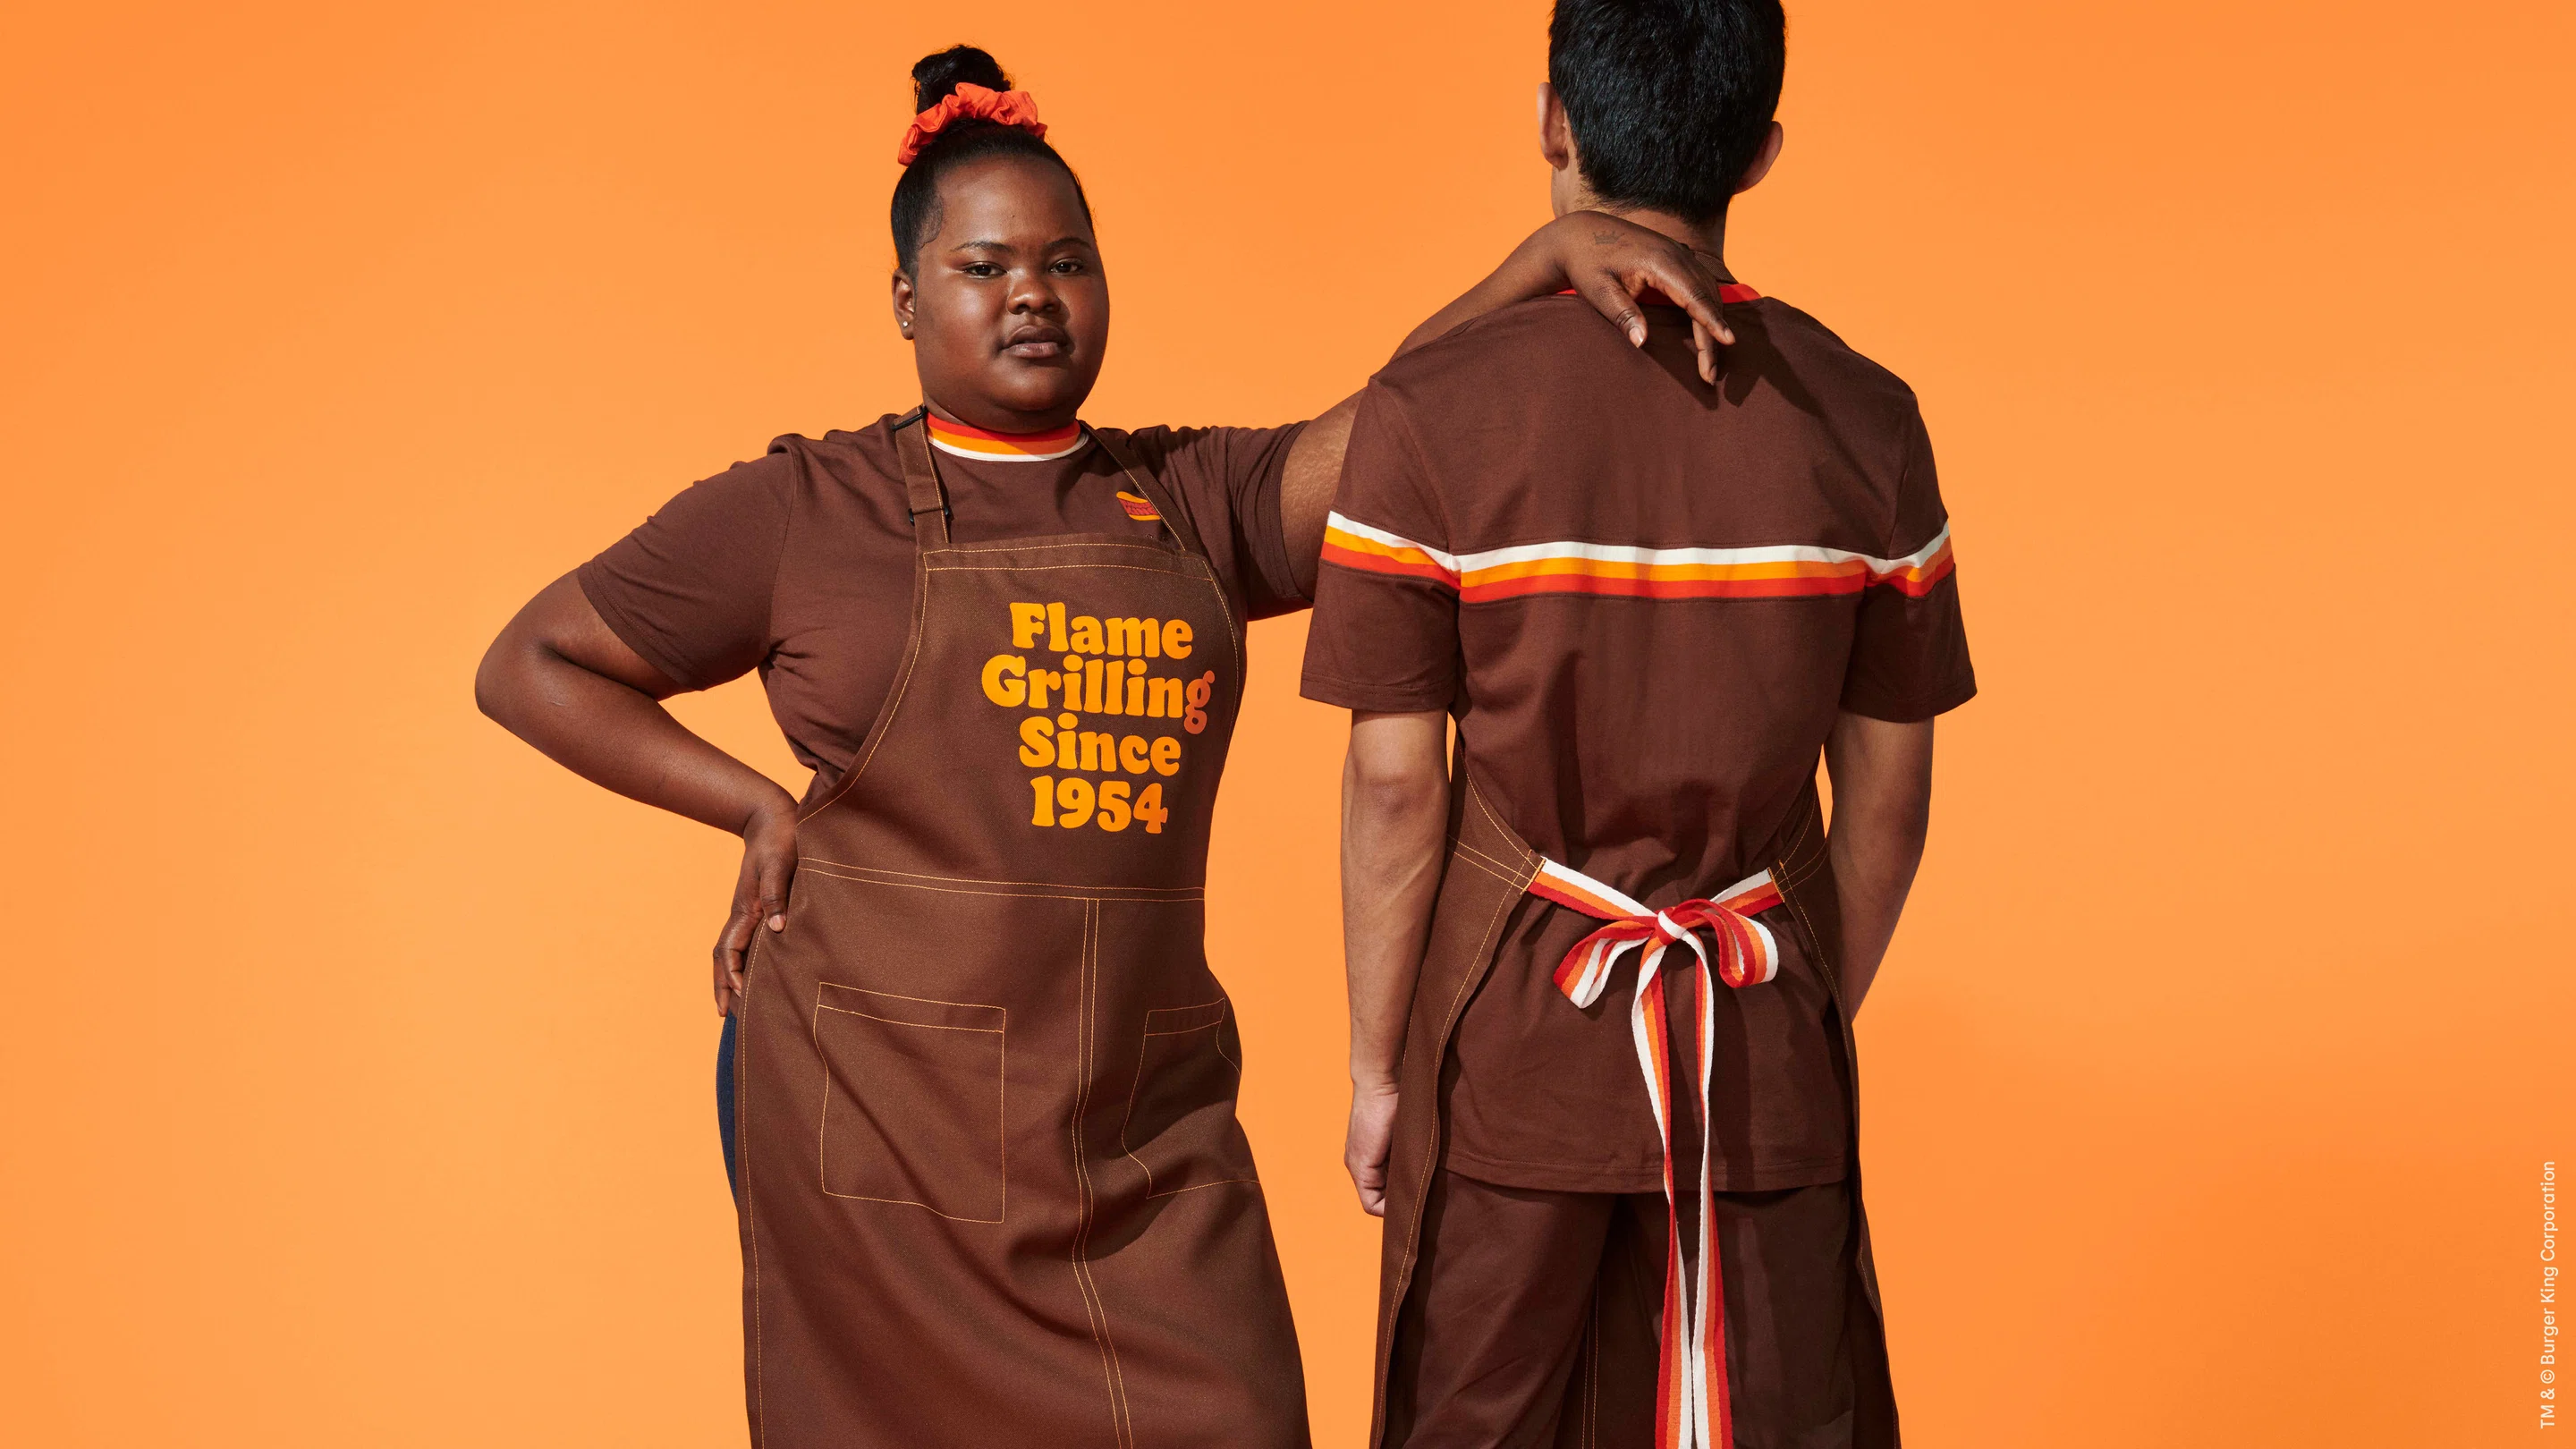 How Burger King Uniforms Have Changed Over the Years: Photo History